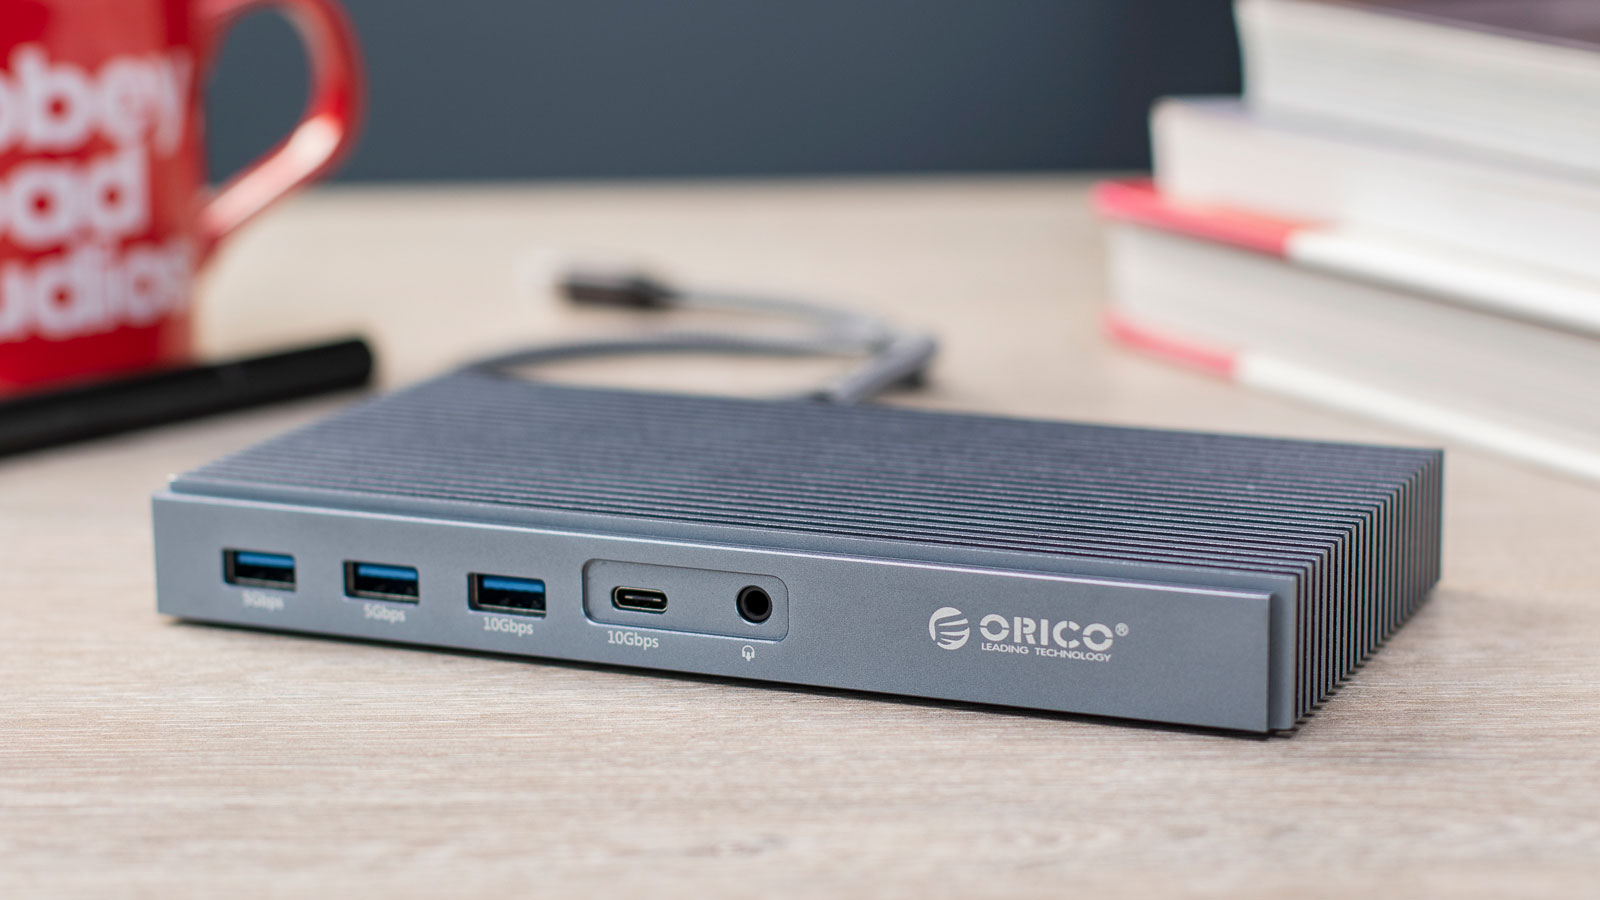 Orico TB3-S2 Thunderbolt 3 Dock – Dock with built-in SSD enclosure